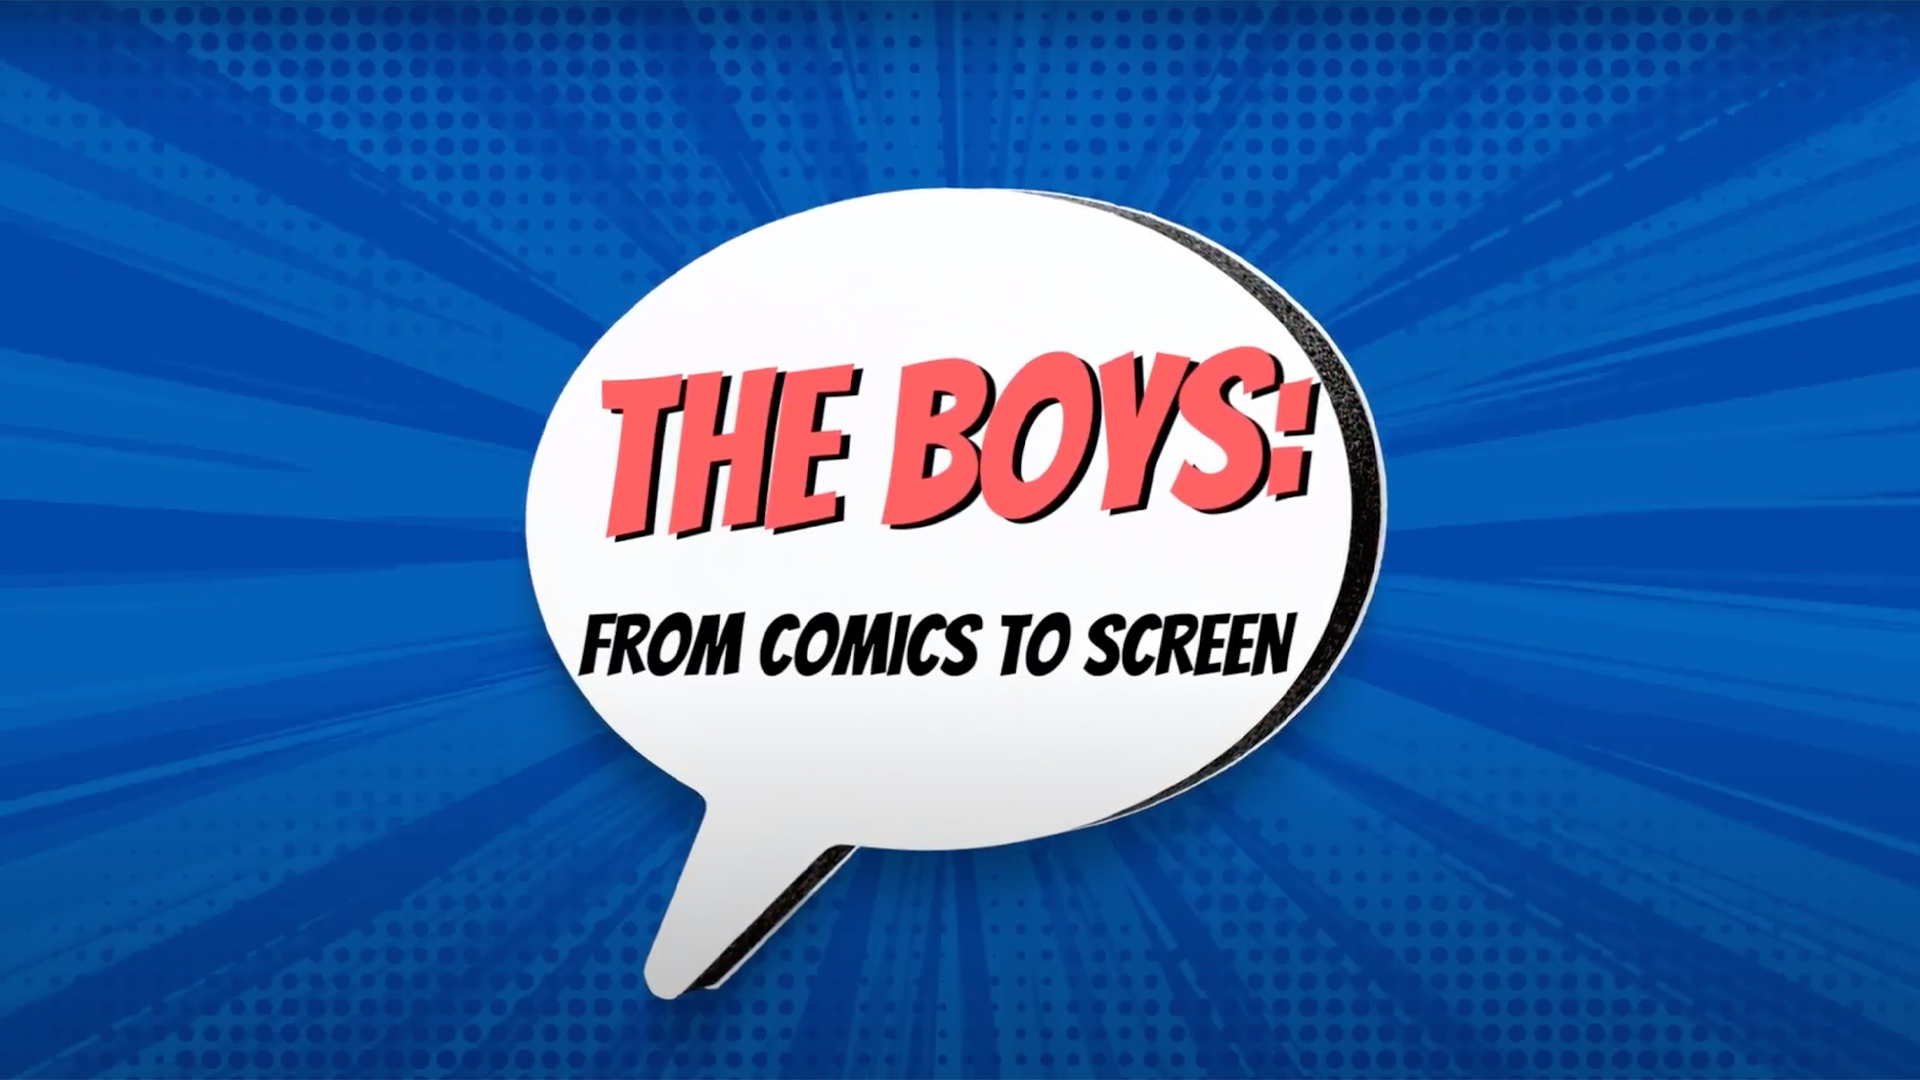 The Boys: From Comics to Screen